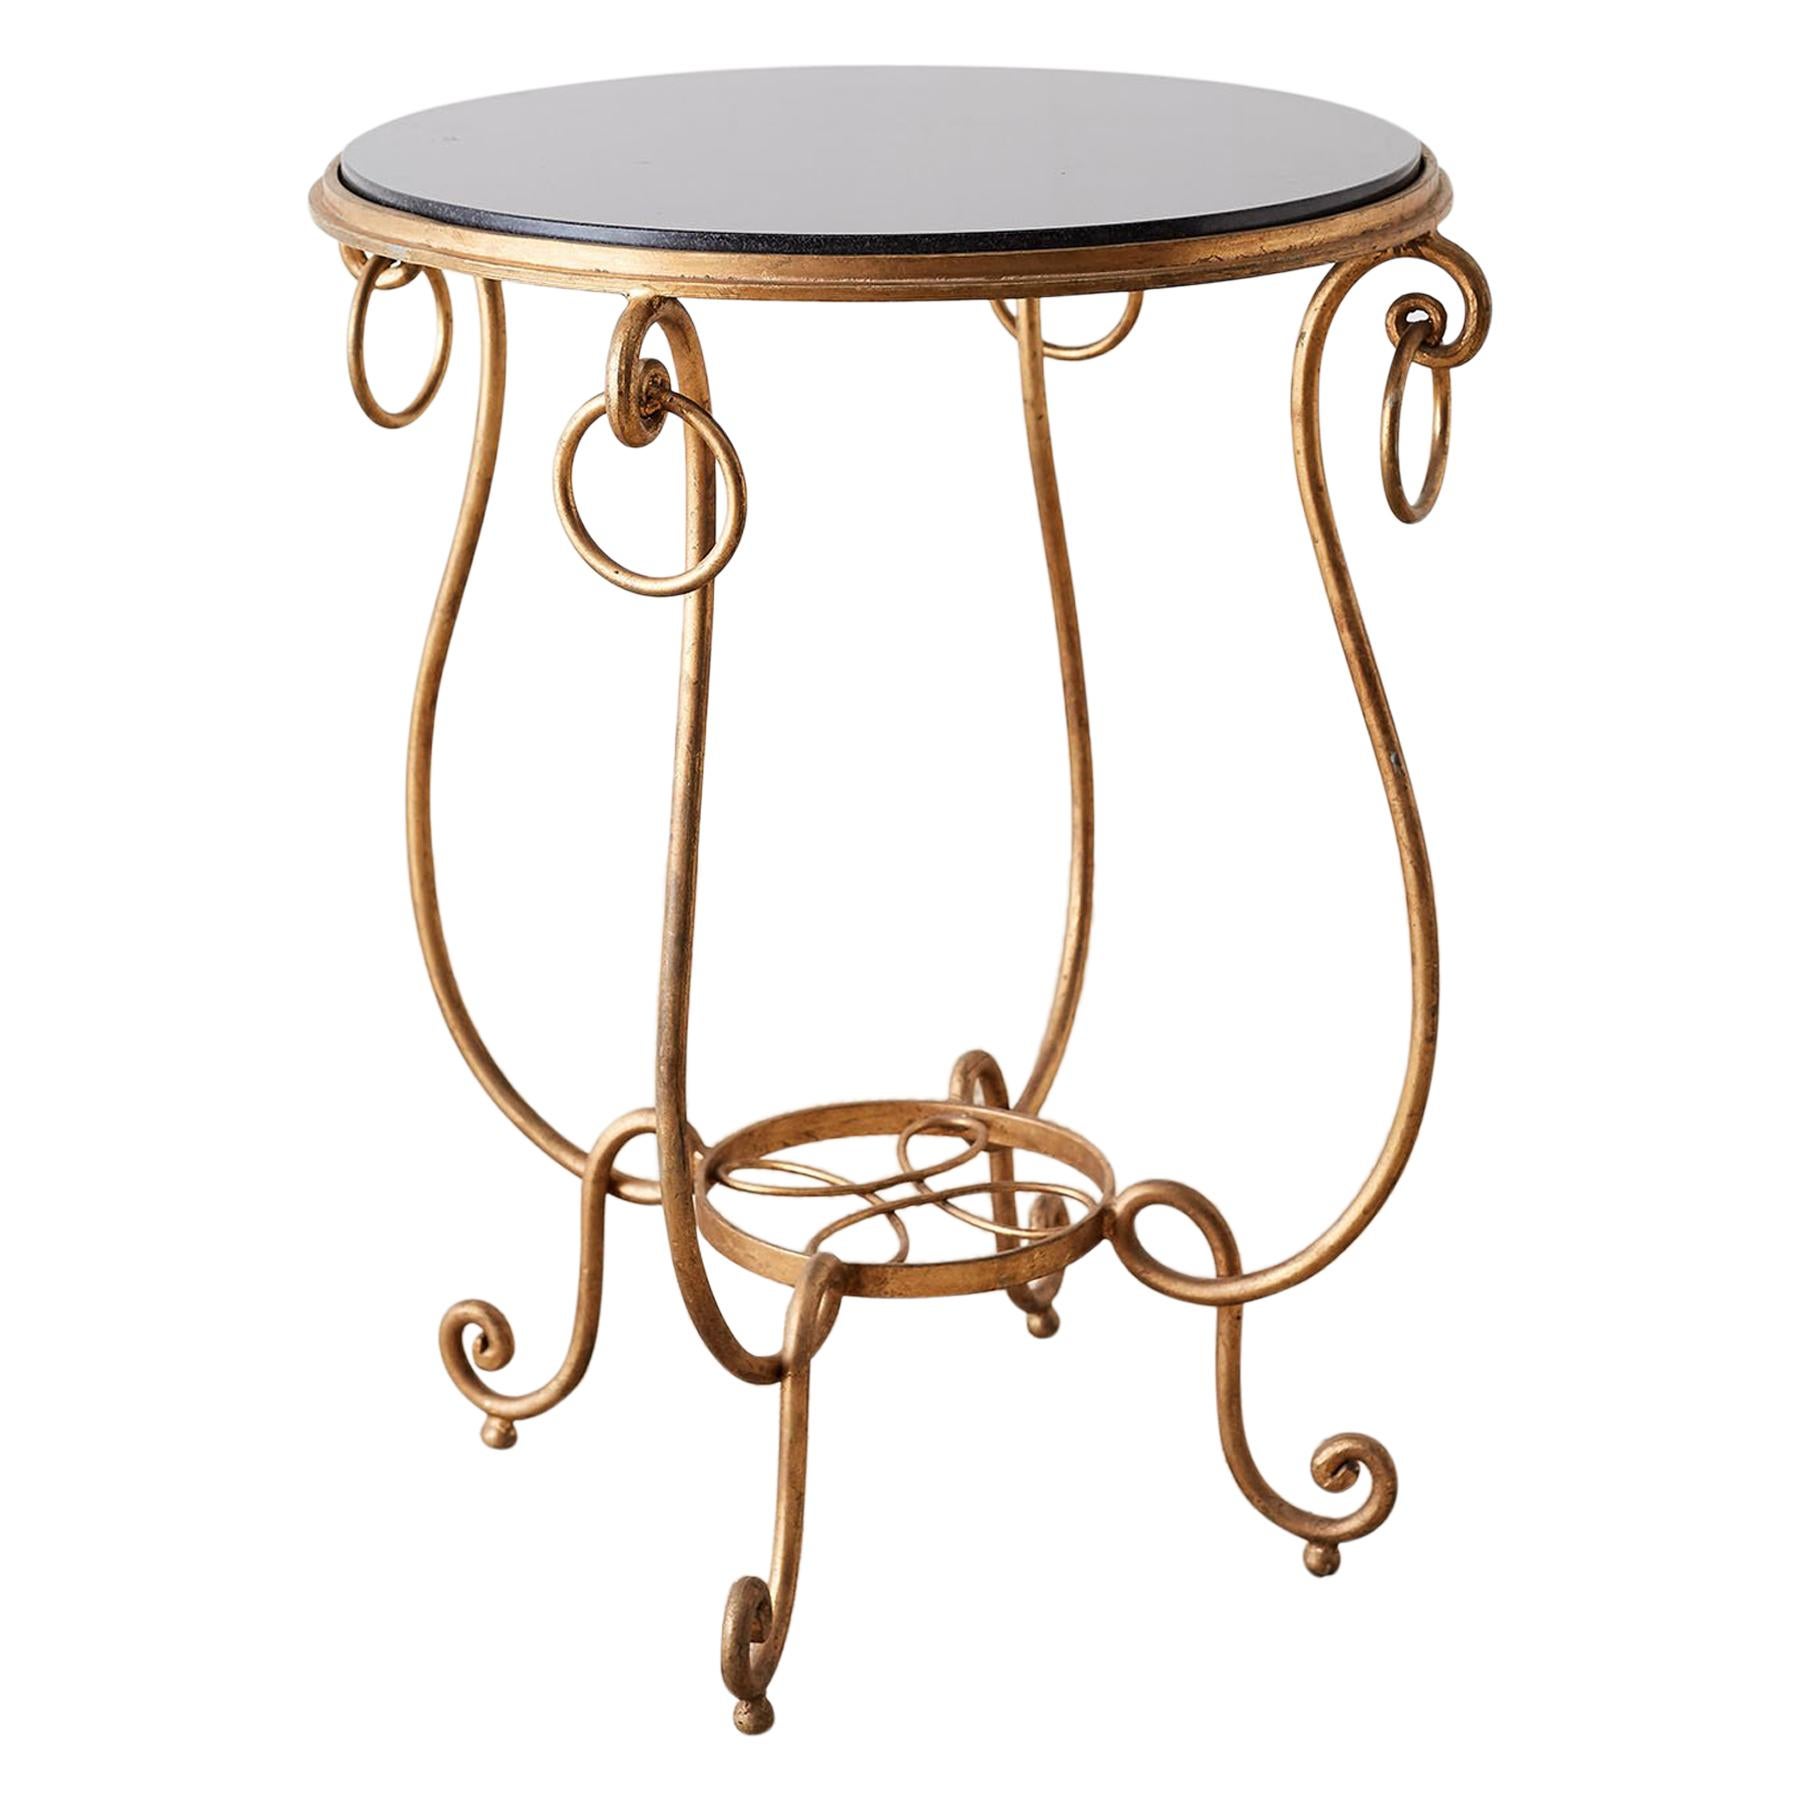 Rene Drouet Style Gilded Iron and Granite Table